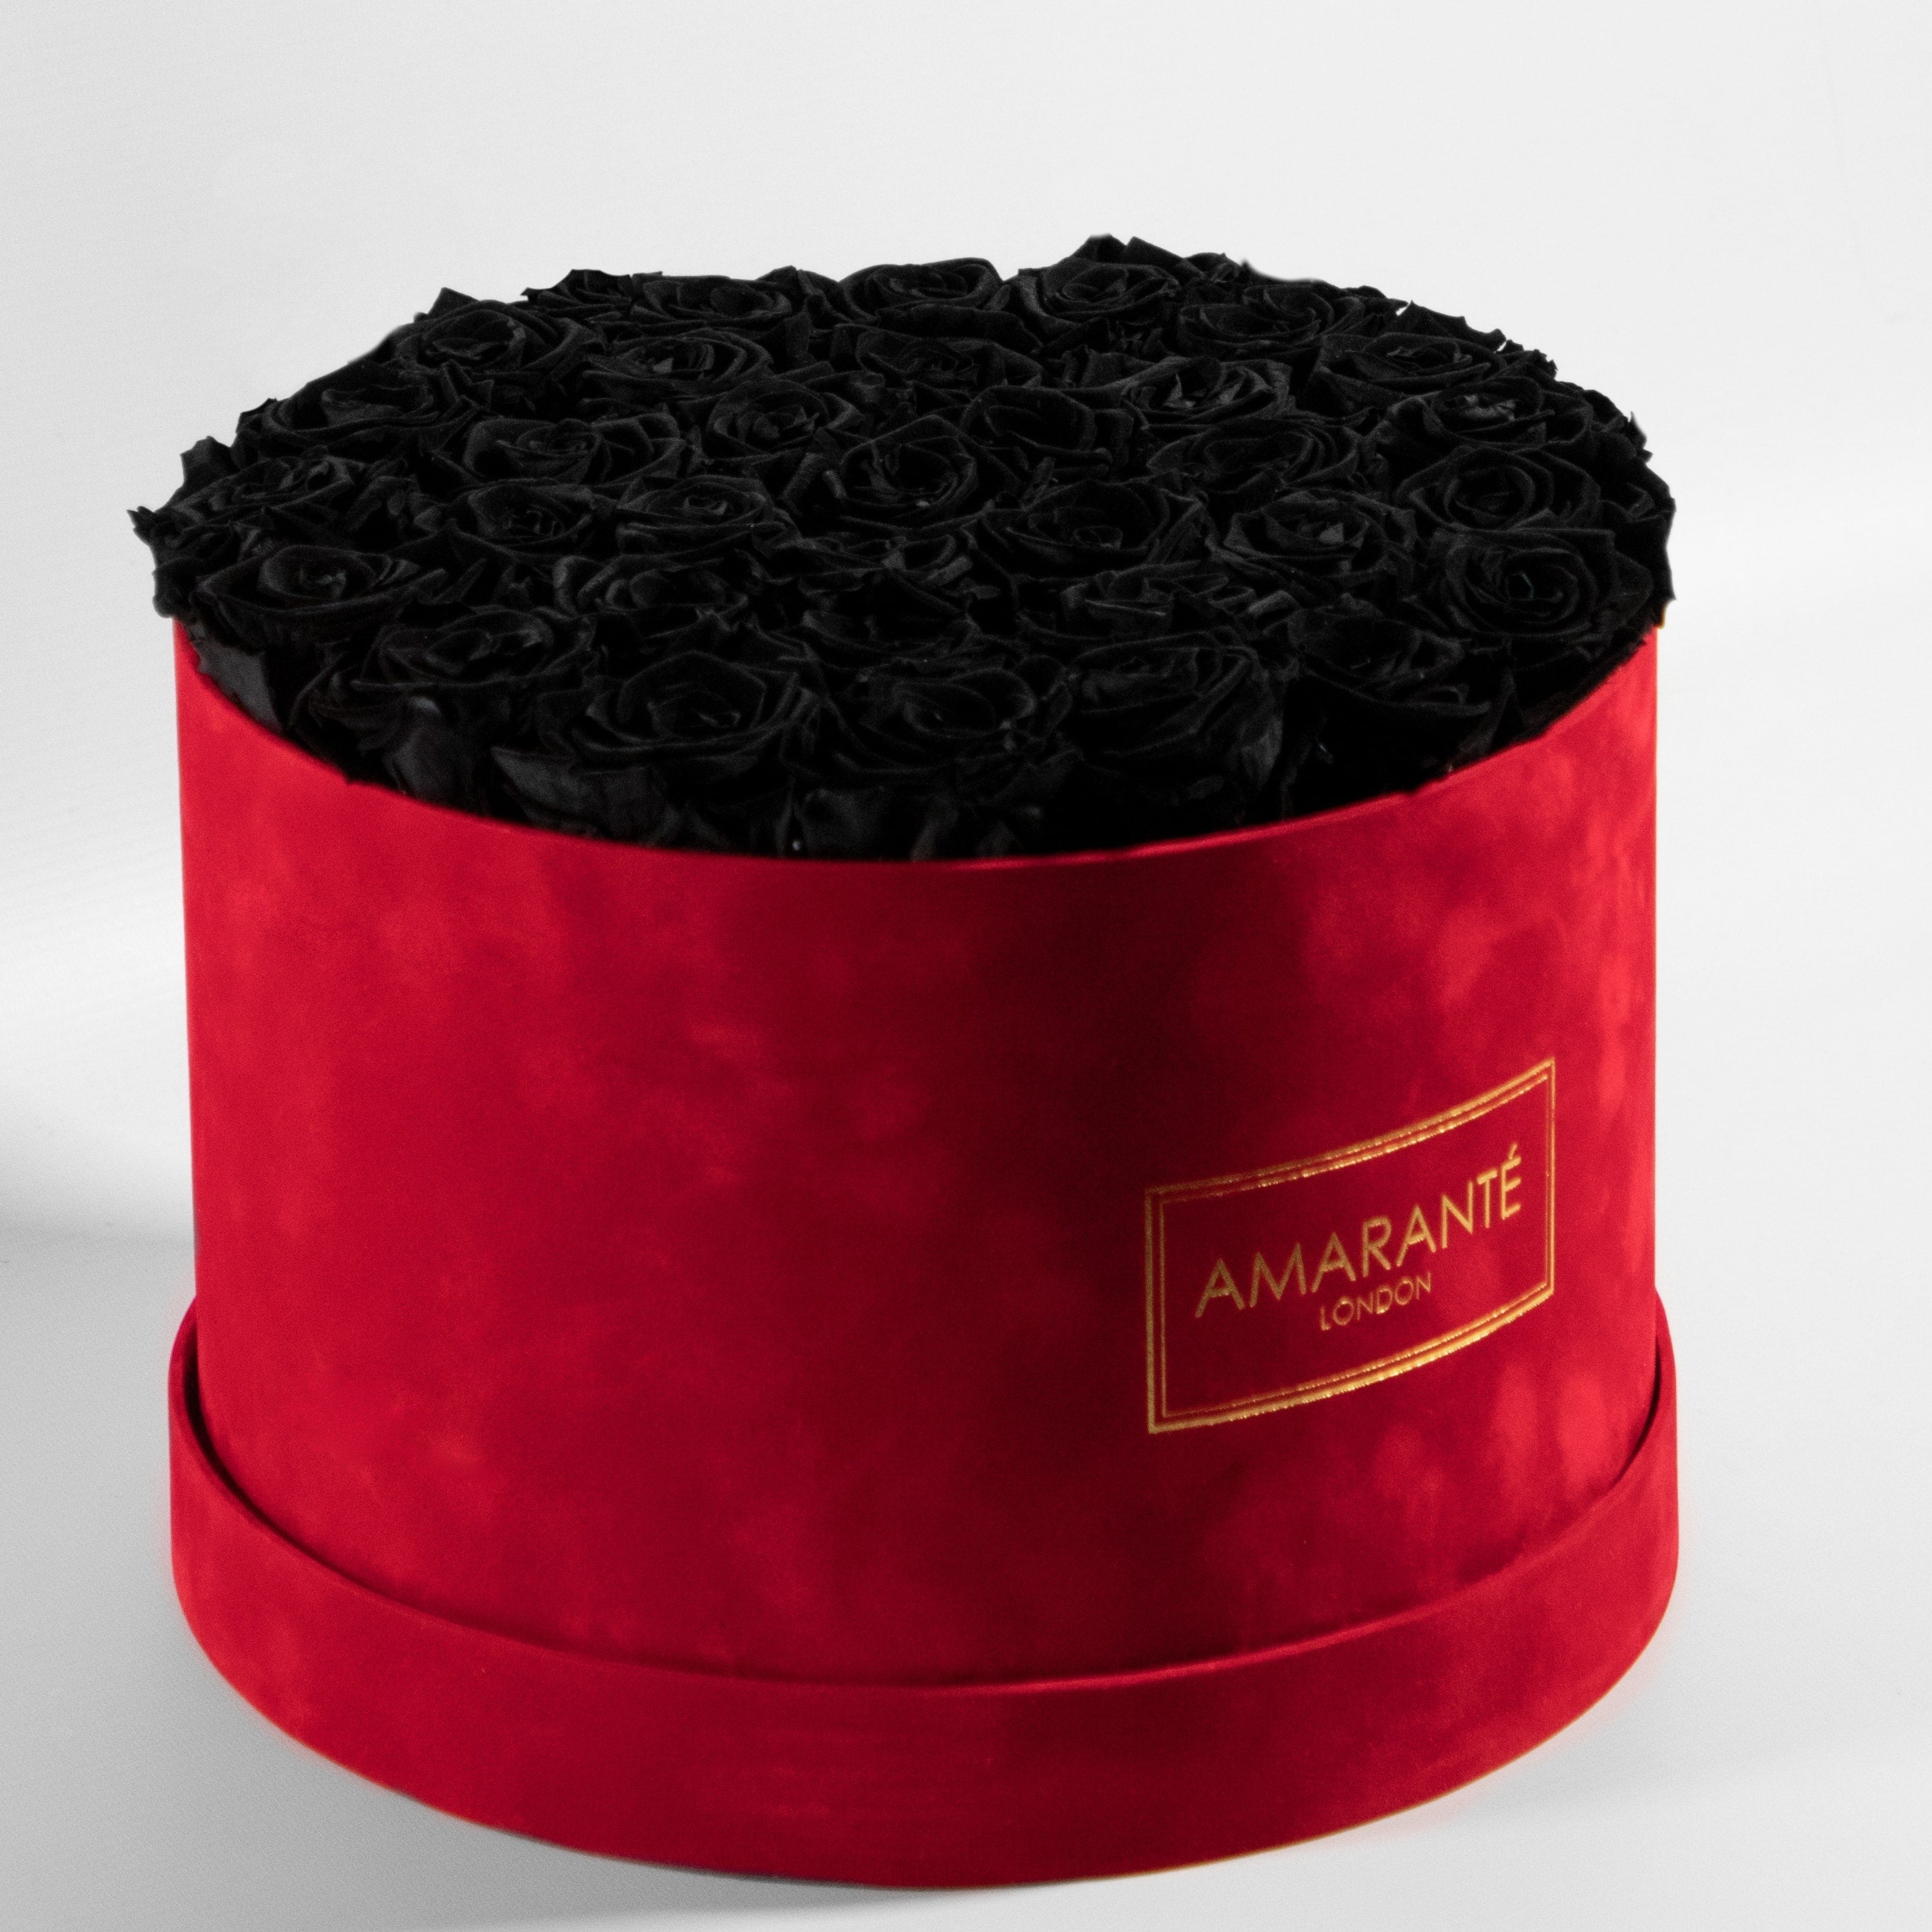 Majestic black Roes shown  in a striking red package connoting luxury and elegance. 